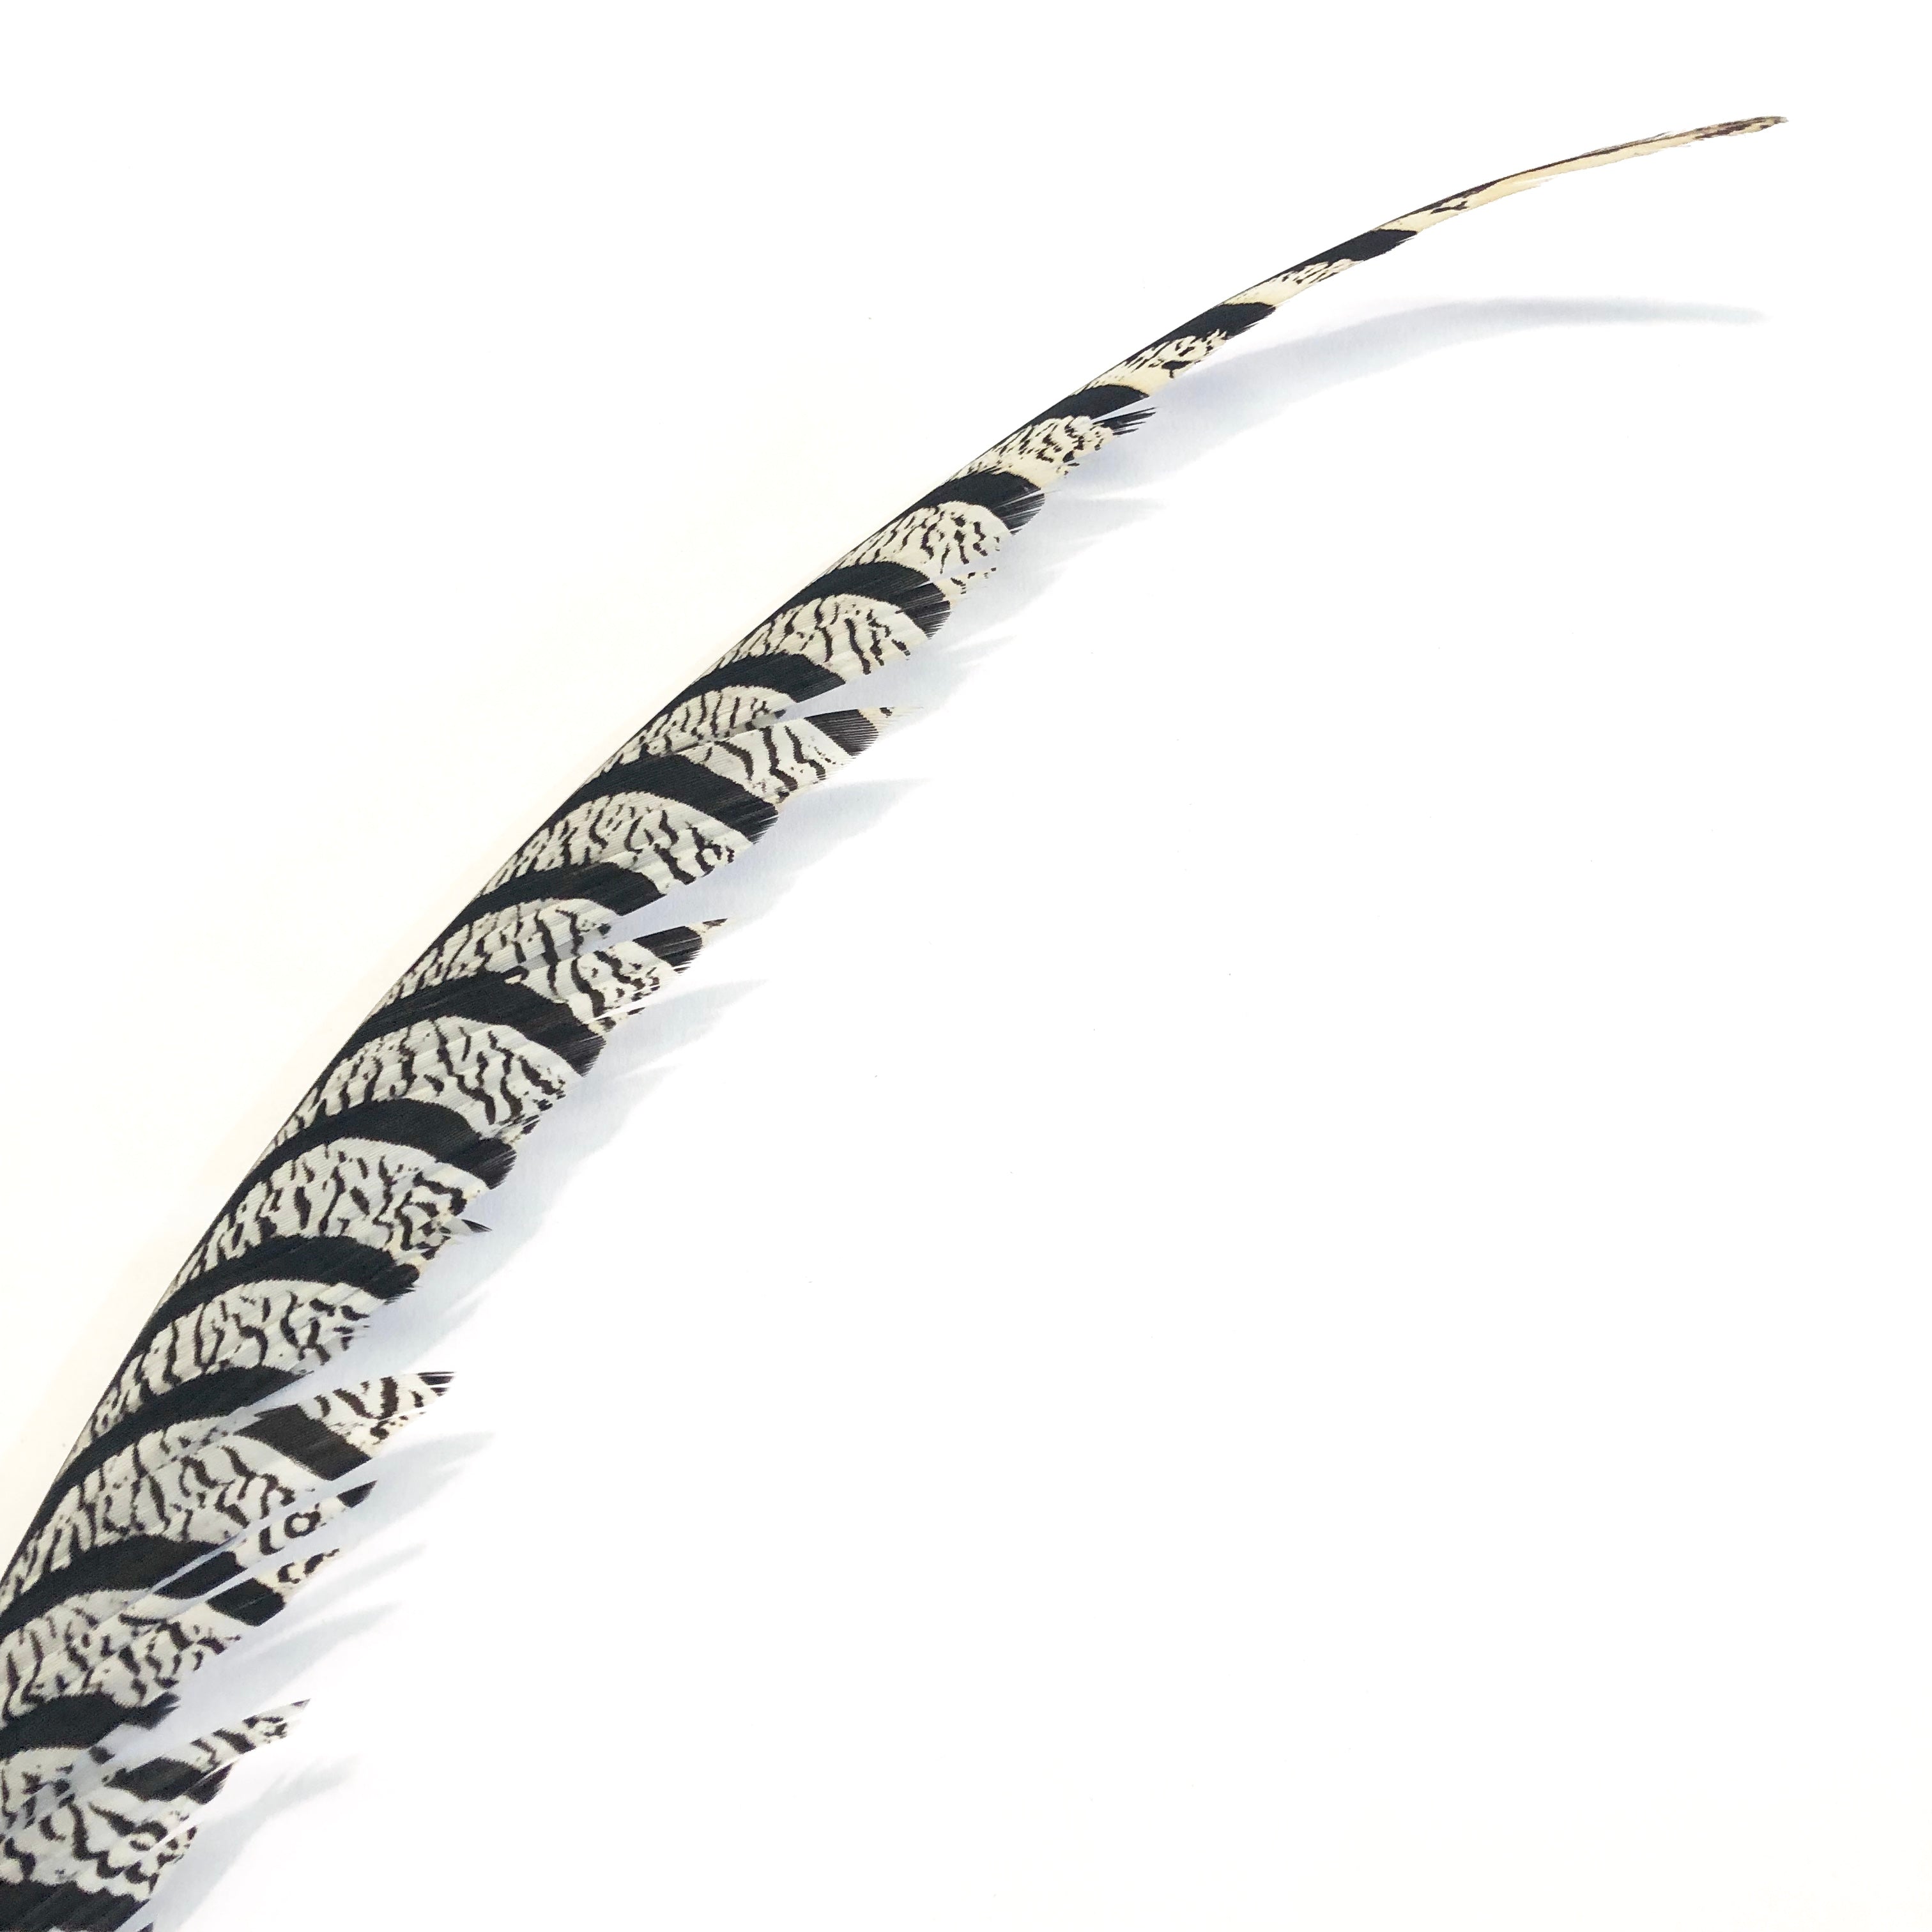 Lady Amherst Pheasant Centre Tail Feather - Natural ((SECONDS))